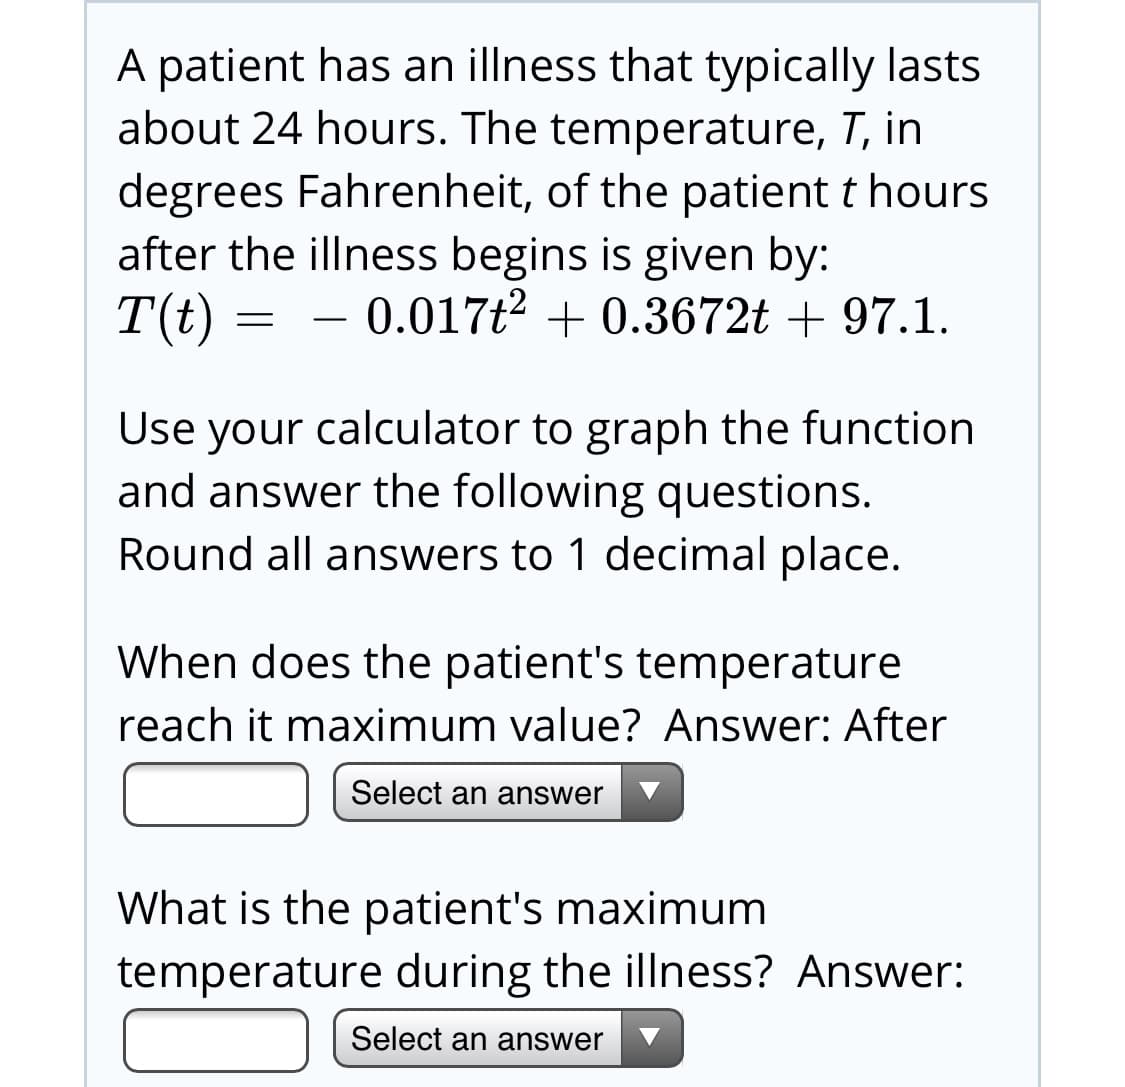 A patient has an illness that typically lasts
about 24 hours. The temperature, T, in
degrees Fahrenheit, of the patient t hours
after the illness begins is given by:
T(t)
- 0.017t2 + 0.3672t + 97.1.
Use your calculator to graph the function
and answer the following questions.
Round all answers to 1 decimal place.
When does the patient's temperature
reach it maximum value? Answer: After
Select an answer
What is the patient's maximum
temperature during the illness? Answer:
Select an answer
